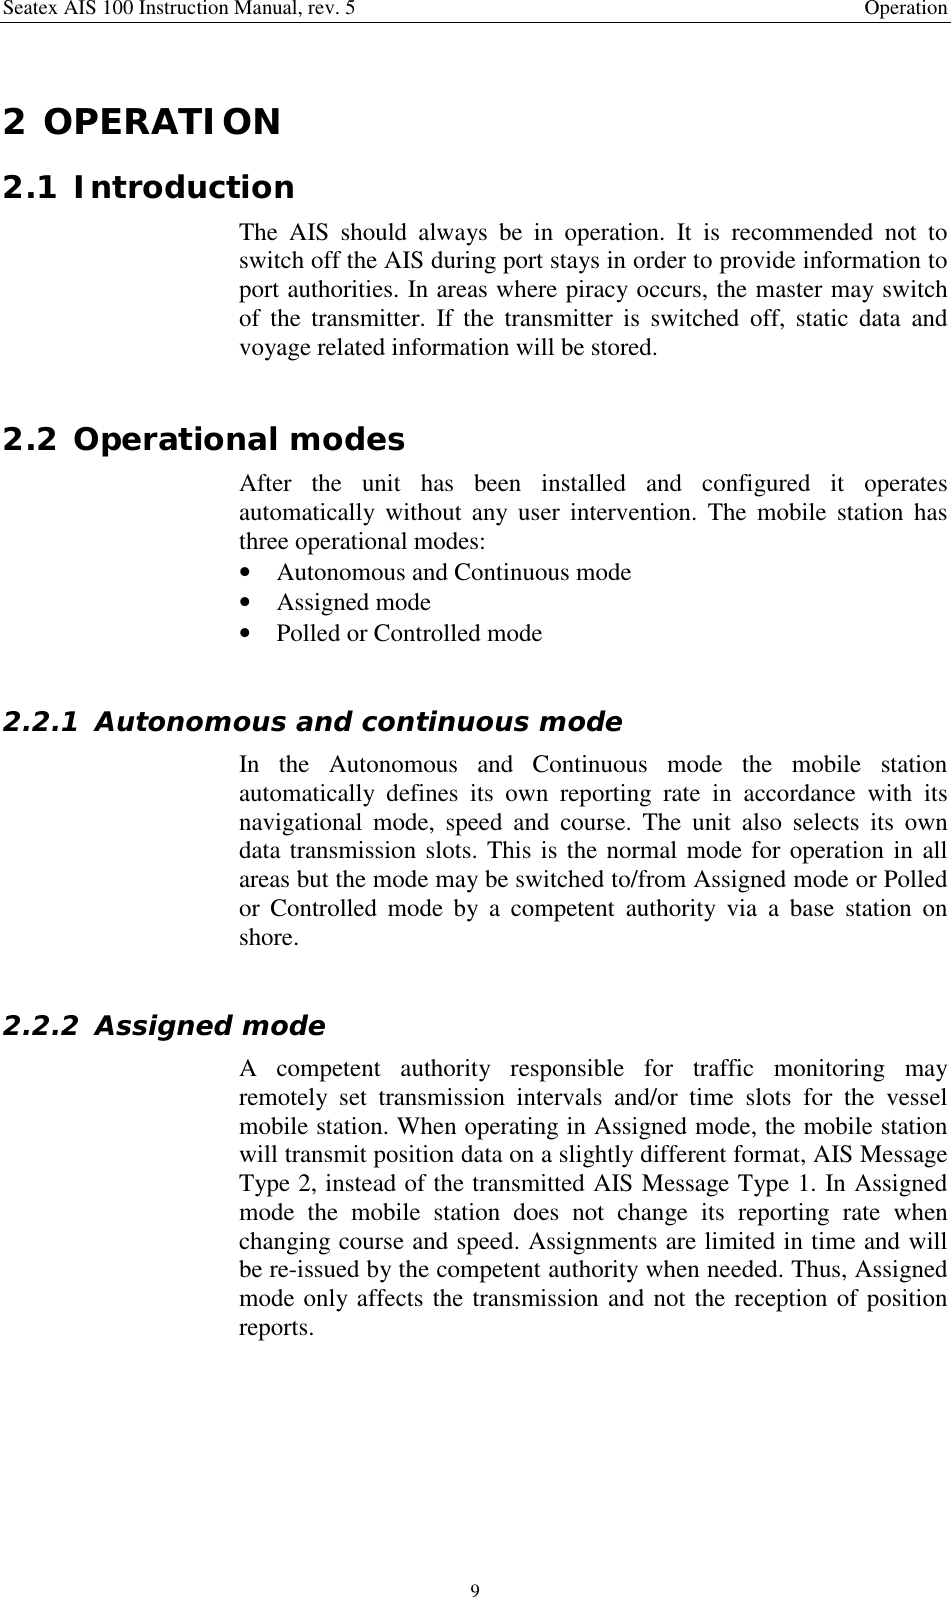 Seatex AIS 100 Instruction Manual, rev. 5 Operation92 OPERATION2.1 IntroductionThe AIS should always be in operation. It is recommended not toswitch off the AIS during port stays in order to provide information toport authorities. In areas where piracy occurs, the master may switchof the transmitter. If the transmitter is switched off, static data andvoyage related information will be stored.2.2 Operational modesAfter the unit has been installed and configured it operatesautomatically without any user intervention. The mobile station hasthree operational modes:• Autonomous and Continuous mode• Assigned mode• Polled or Controlled mode2.2.1 Autonomous and continuous modeIn the Autonomous and Continuous mode the mobile stationautomatically defines its own reporting rate in accordance with itsnavigational mode, speed and course. The unit also selects its owndata transmission slots. This is the normal mode for operation in allareas but the mode may be switched to/from Assigned mode or Polledor Controlled mode by a competent authority via a base station onshore.2.2.2 Assigned modeA competent authority responsible for traffic monitoring mayremotely set transmission intervals and/or time slots for the vesselmobile station. When operating in Assigned mode, the mobile stationwill transmit position data on a slightly different format, AIS MessageType 2, instead of the transmitted AIS Message Type 1. In Assignedmode the mobile station does not change its reporting rate whenchanging course and speed. Assignments are limited in time and willbe re-issued by the competent authority when needed. Thus, Assignedmode only affects the transmission and not the reception of positionreports.